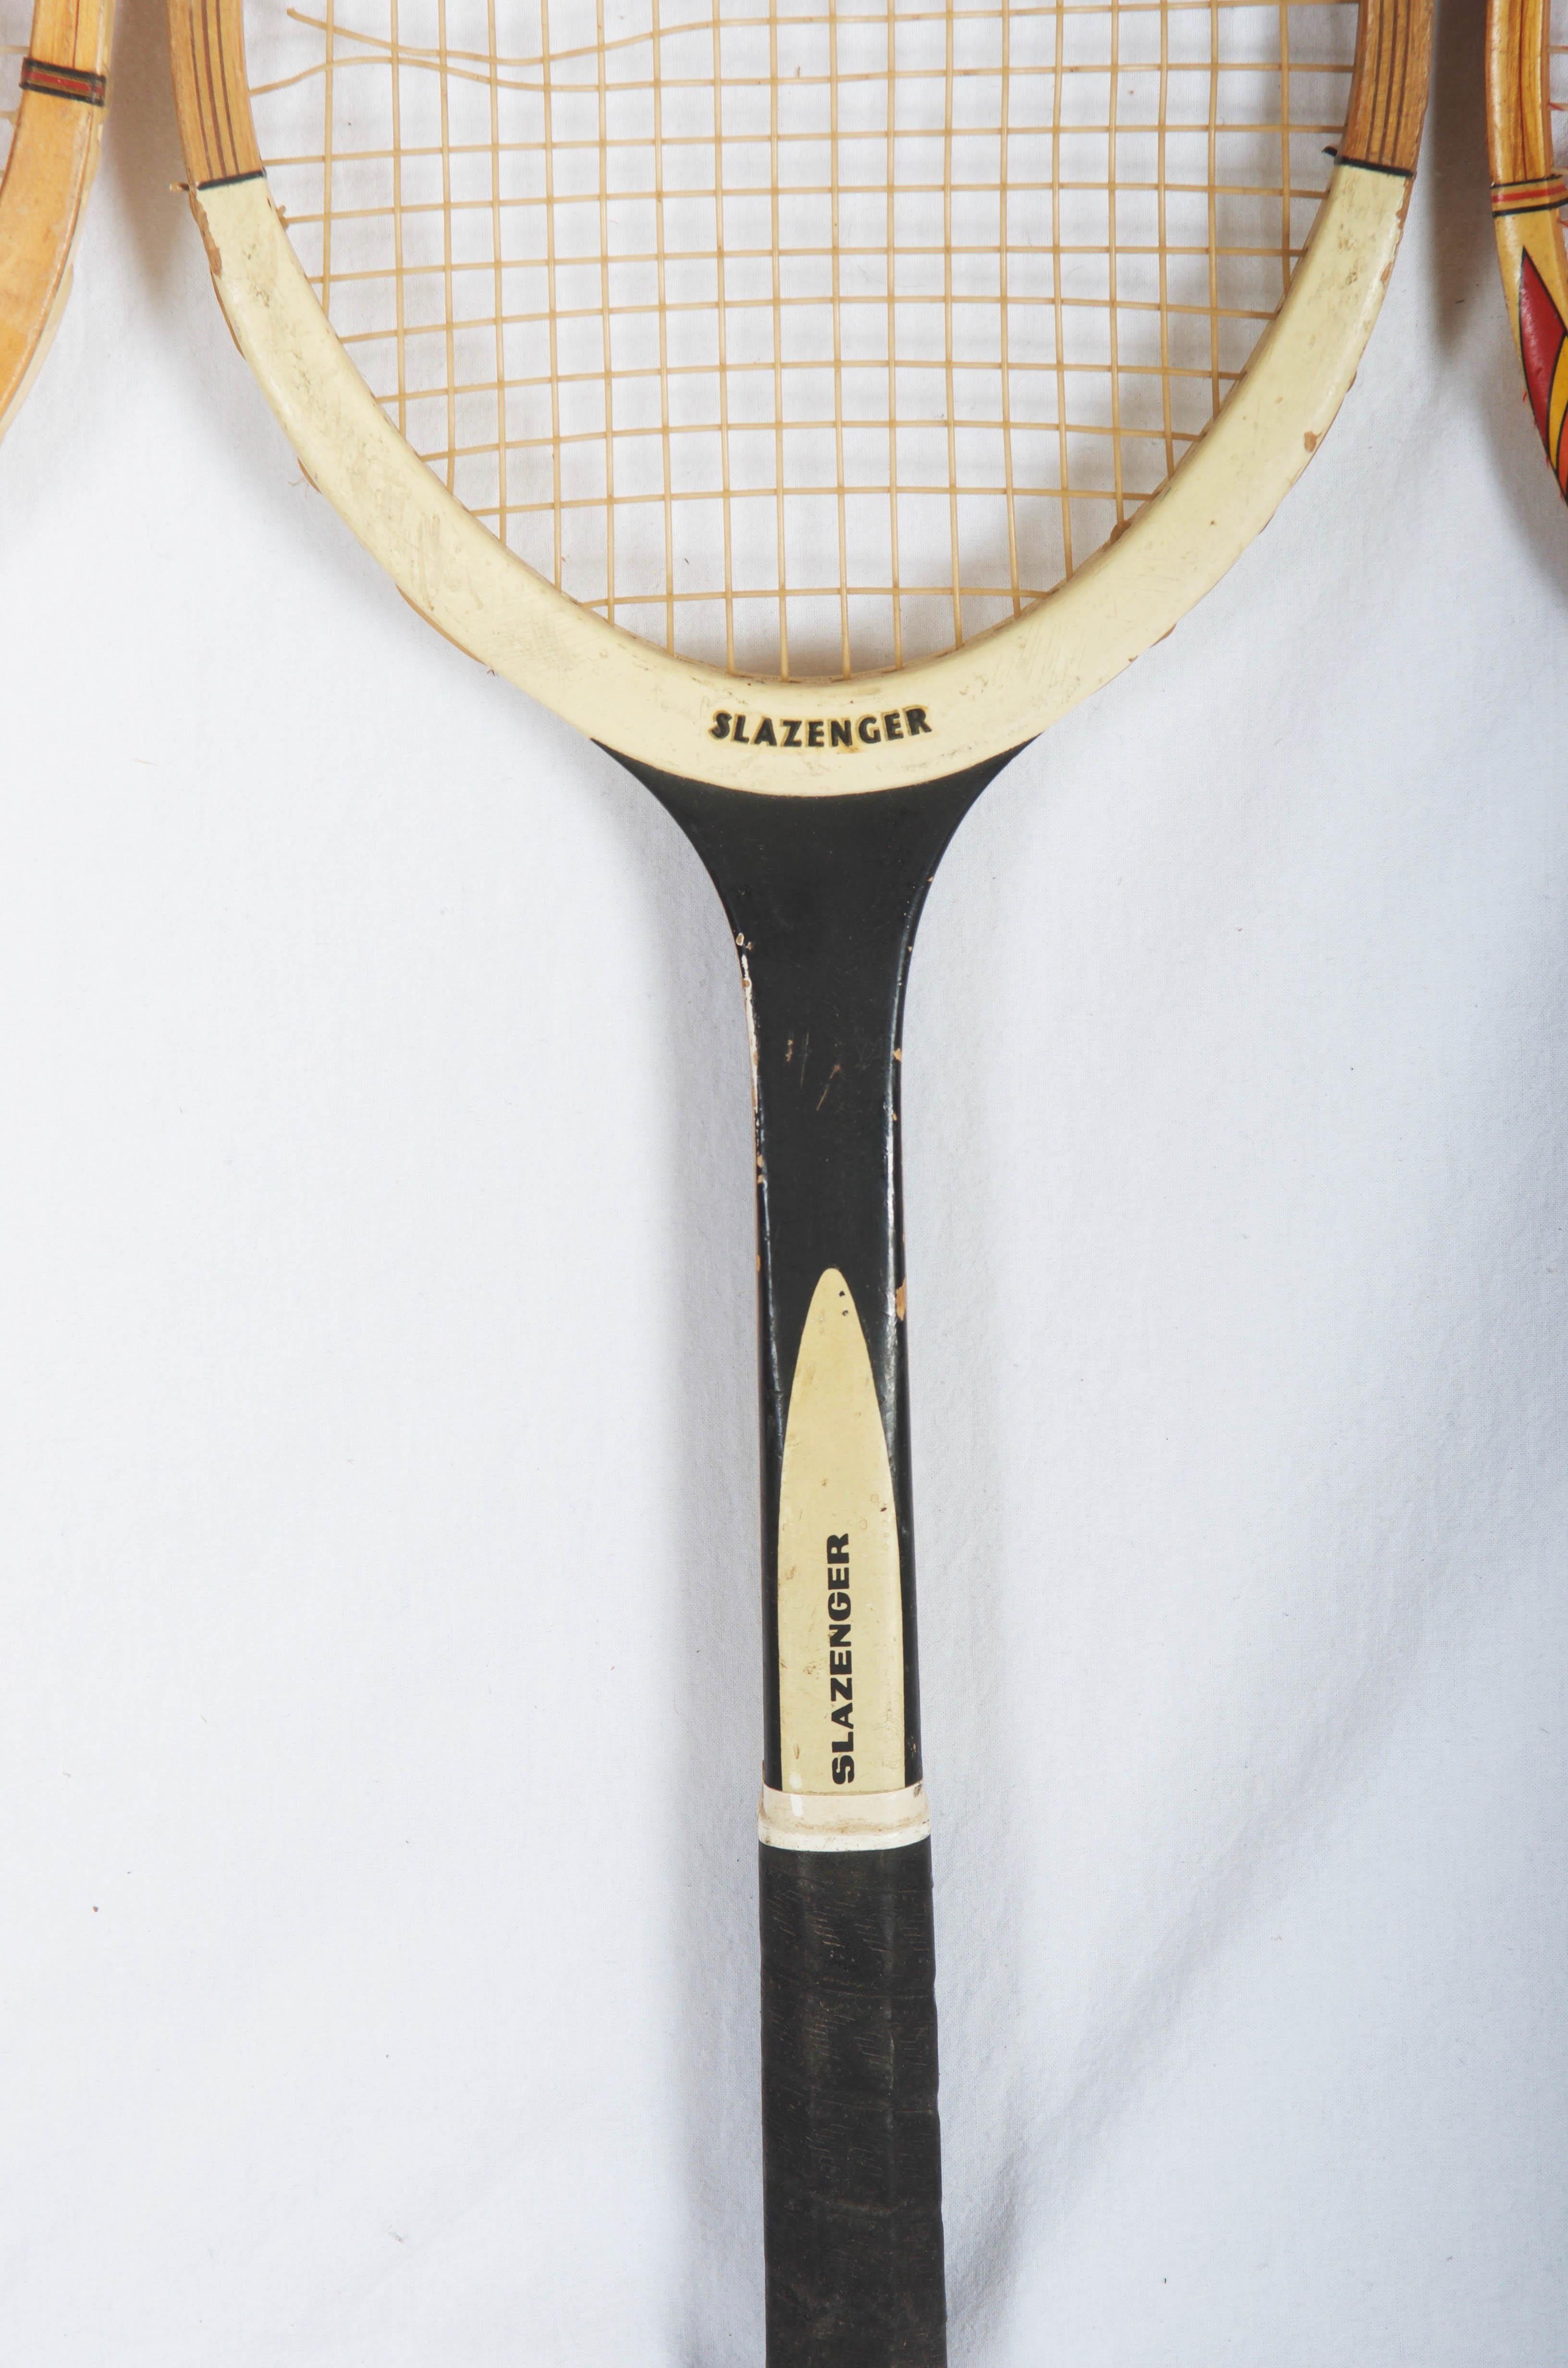 vintage tennis rackets for sale